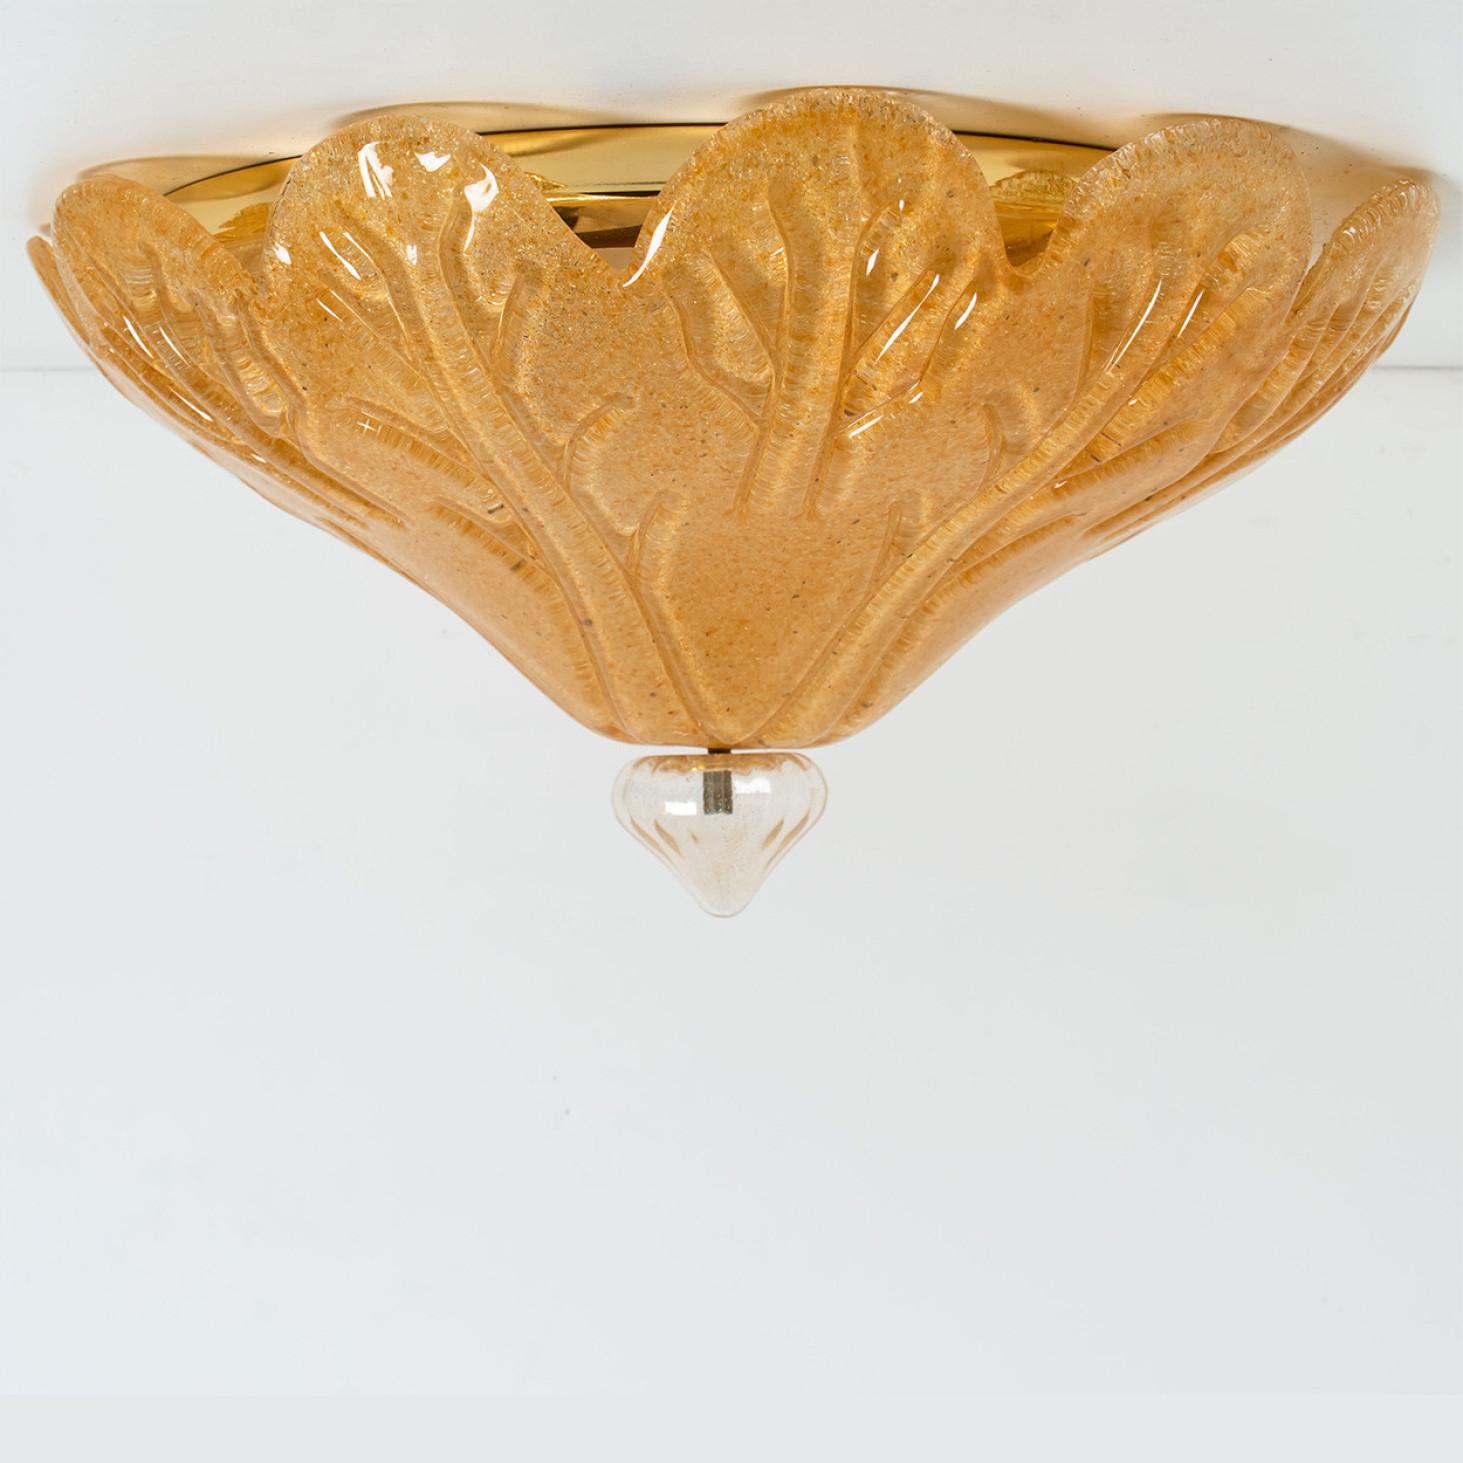 An elegant hand blown Murano glass flush mount , Italy, 1970s.
The leaf shaped glass is gold speckled and has a clear 'top' with gold speckles. Mounted on a golden brass frame. The textured glass refracts light beautifully.

The flush mount fills